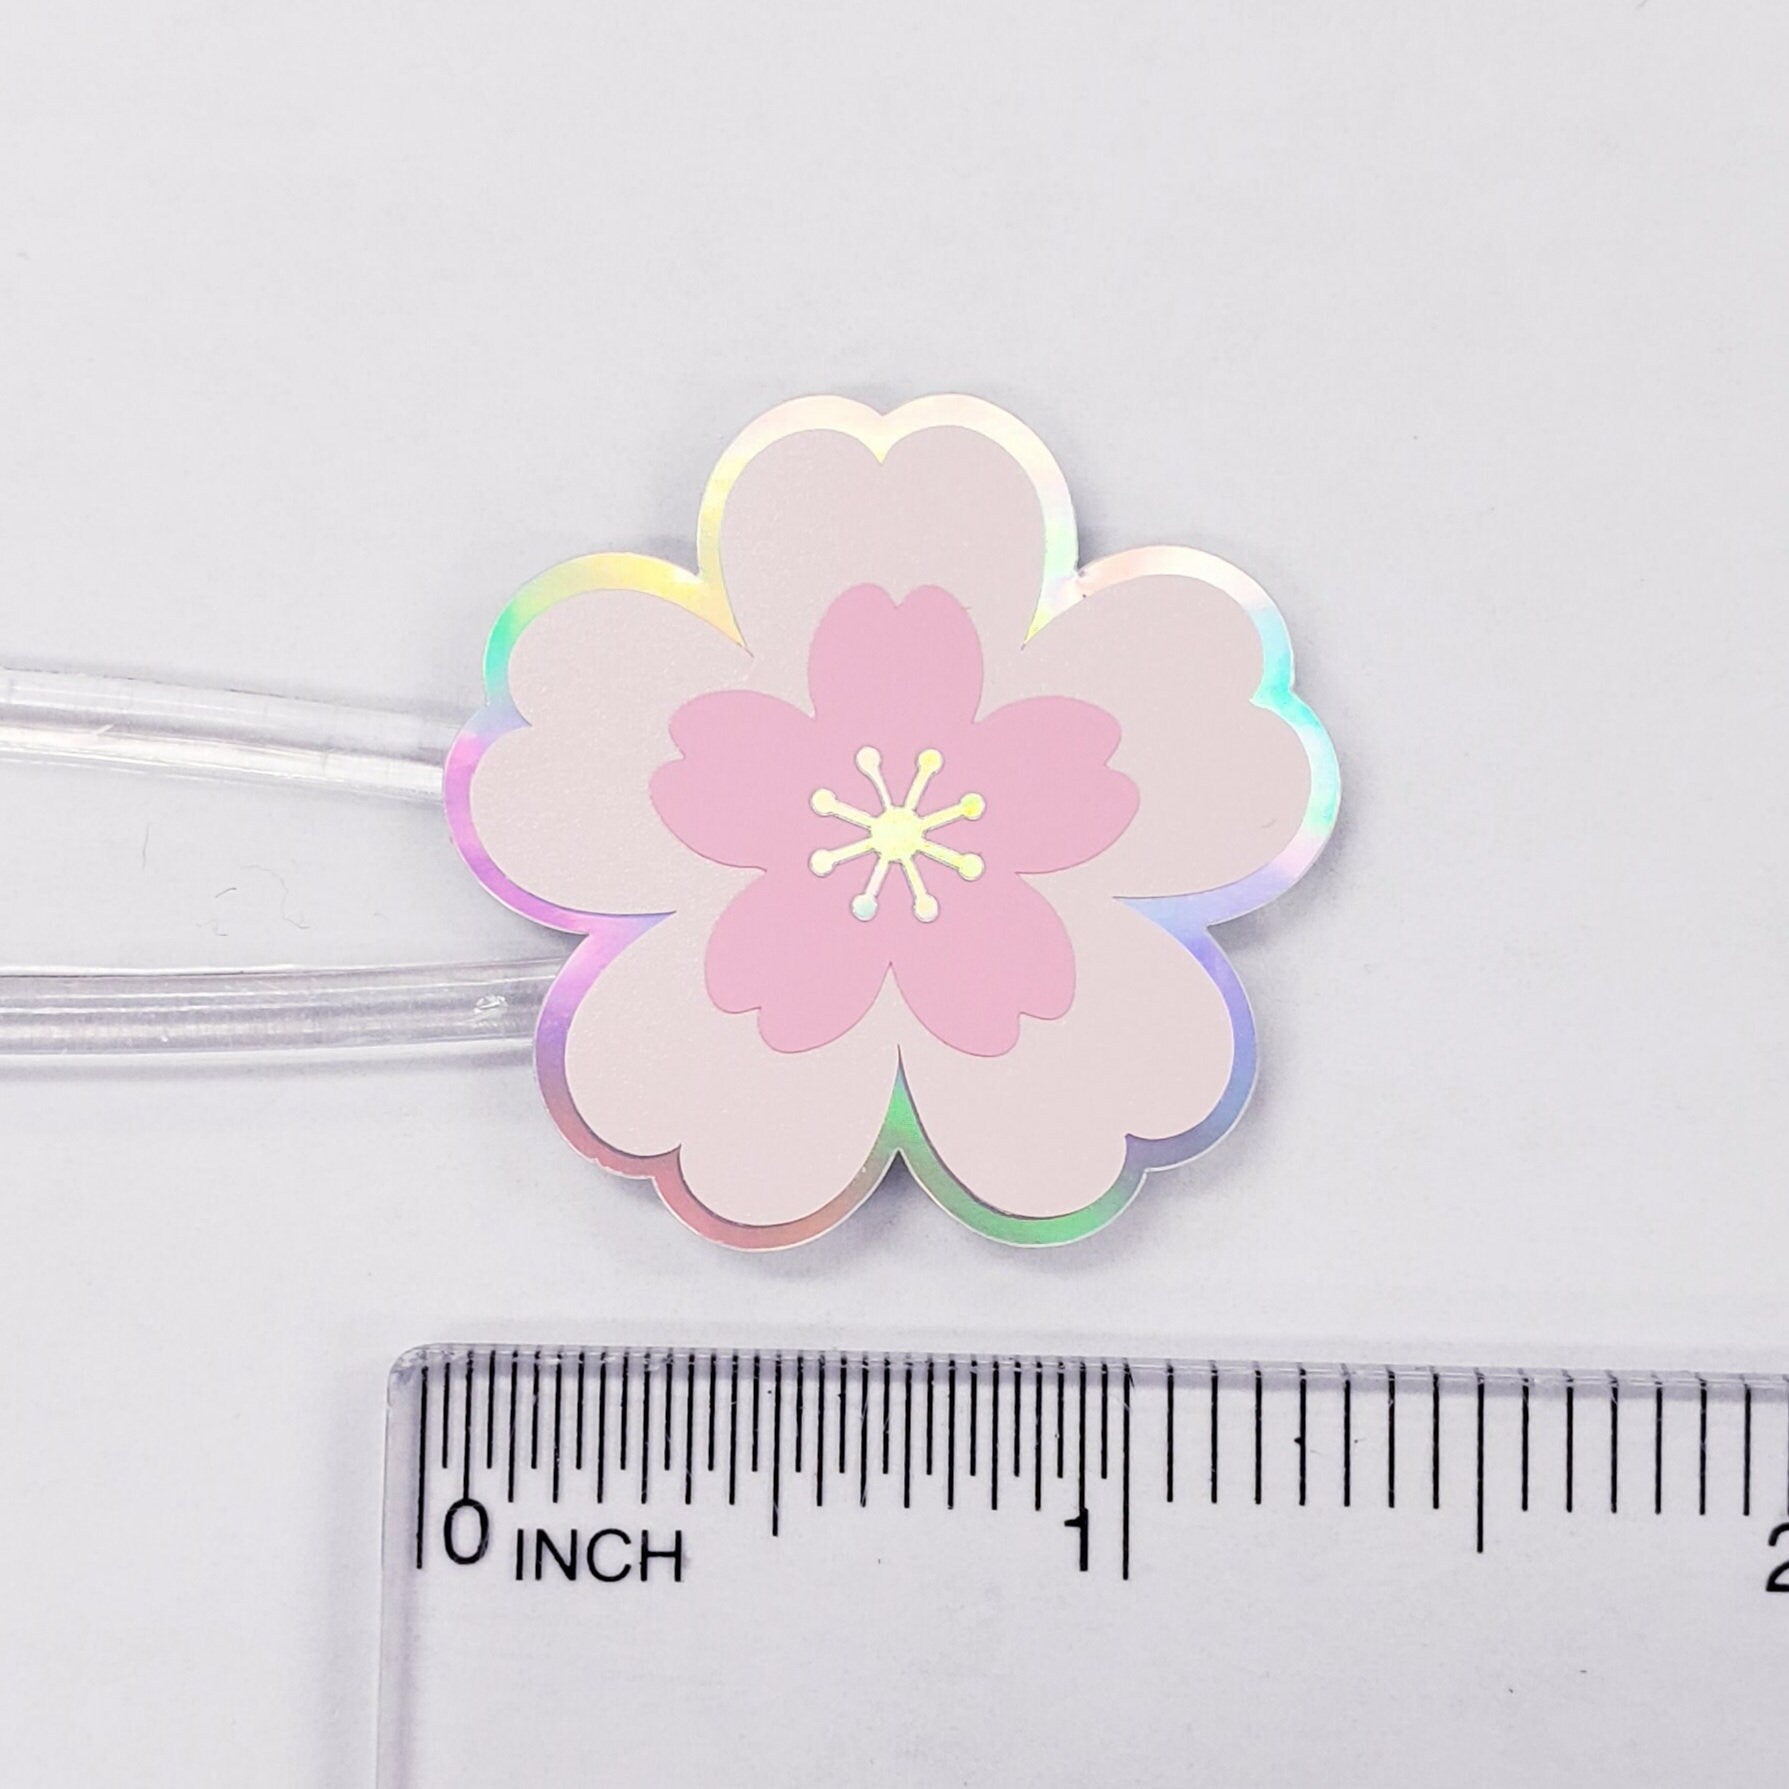 20 Holographic Cherry Blossom Stickers, Pink Sakura Flower Decals, Spring Crafts, Wedding Envelope Seals, Mother's Day Gift, peel and stick